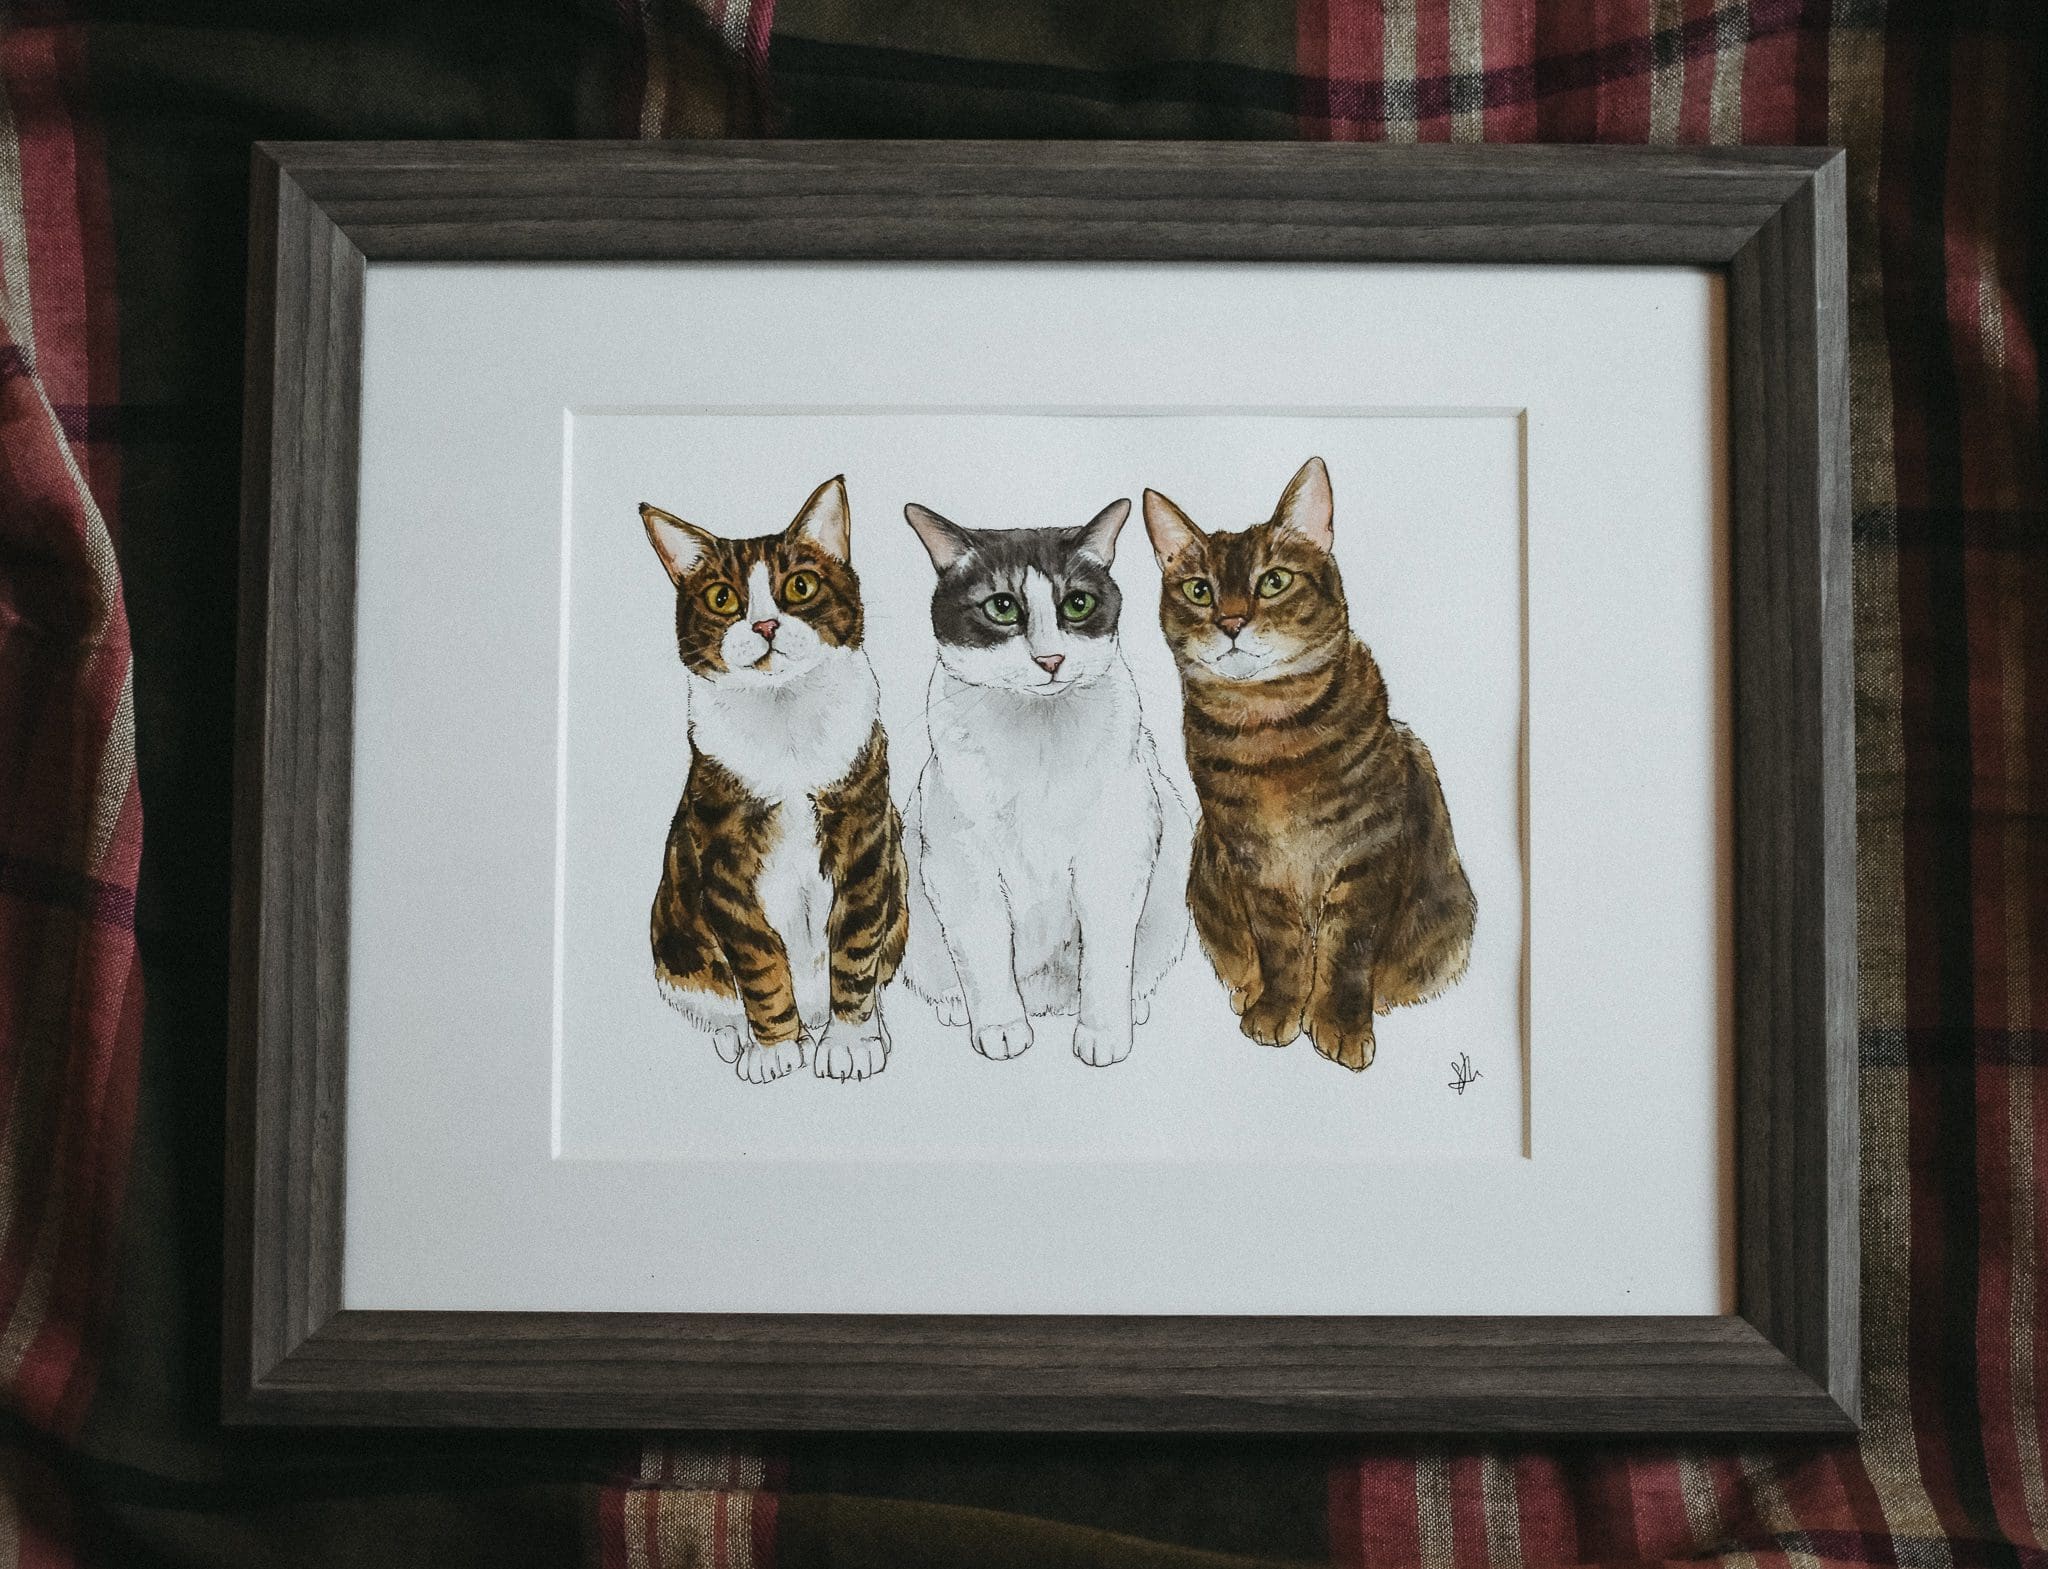 You Pet It. She Paints it. Sarah Miller of Sarah Paints Pets is an Atlanta-based pet portrait artist. We commissioned a three-cat portrait for our furbabies and the finished project was amazing. Read about the process and see the portrait here!